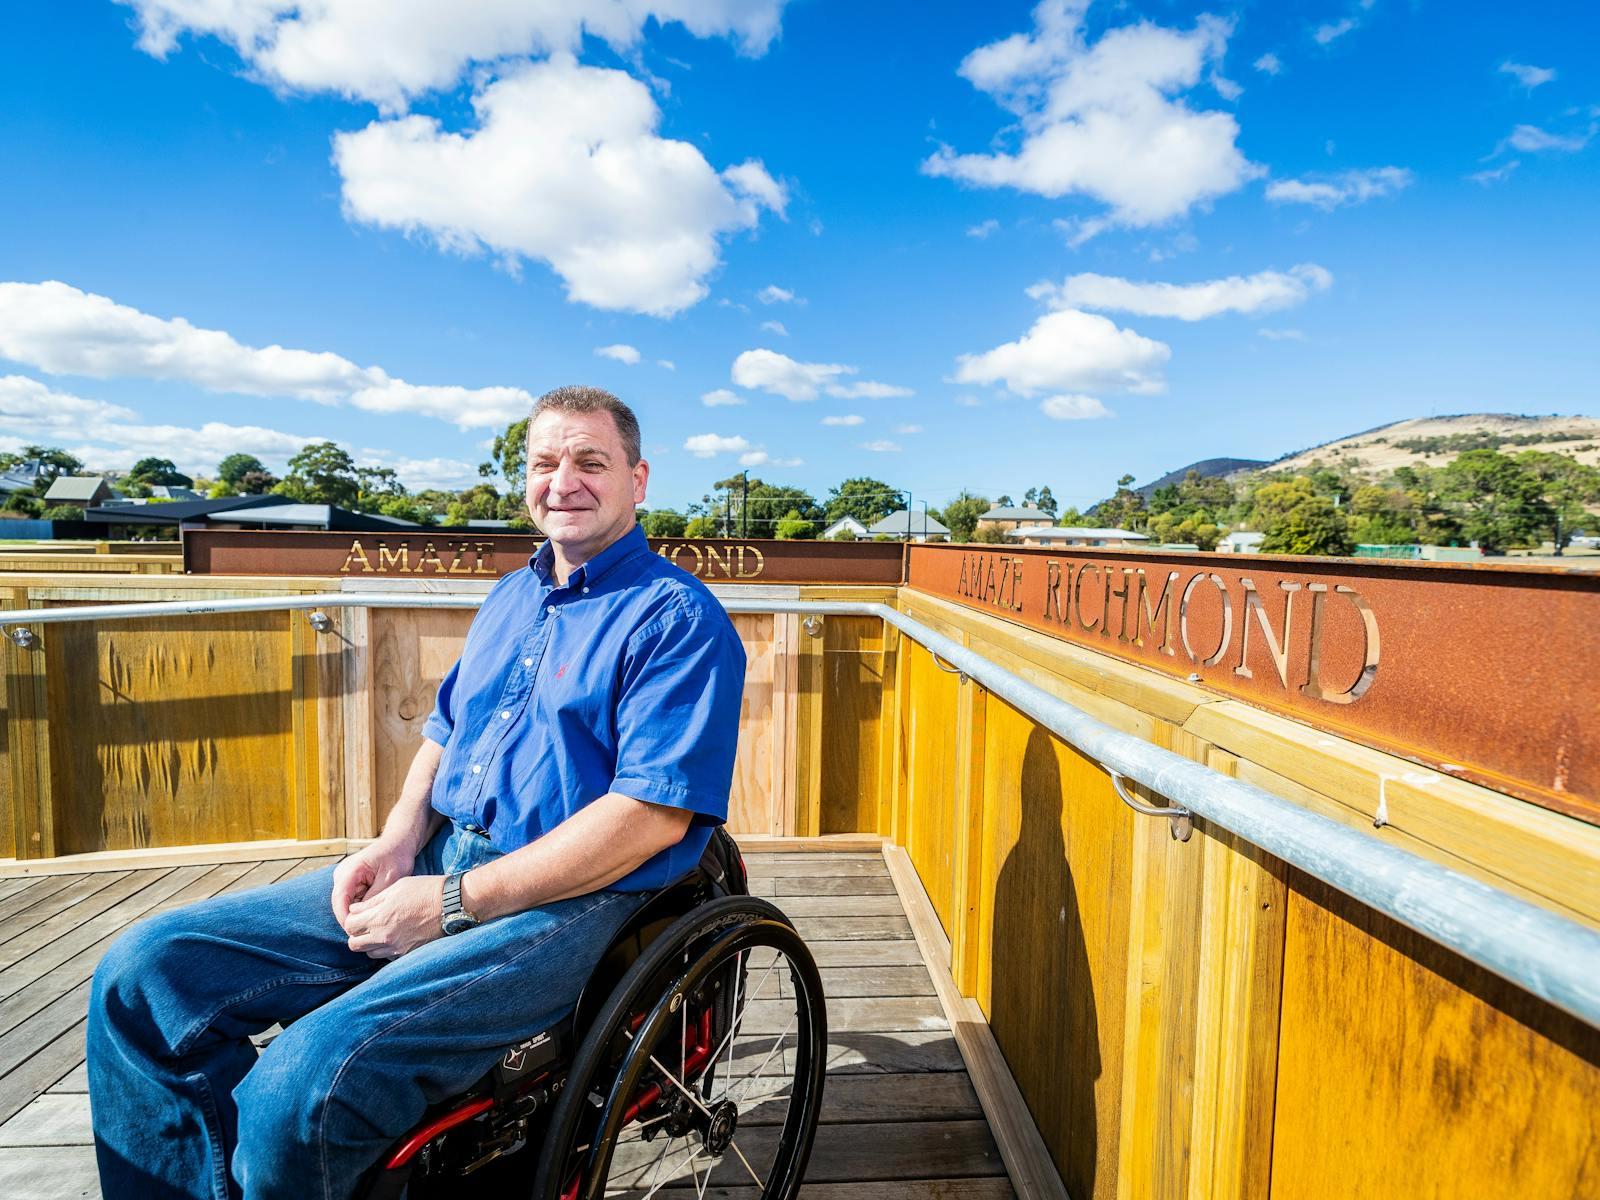 Smiling man wearing a blue shirt and jeans, sitting in a wheelchair in front of a metal sign.